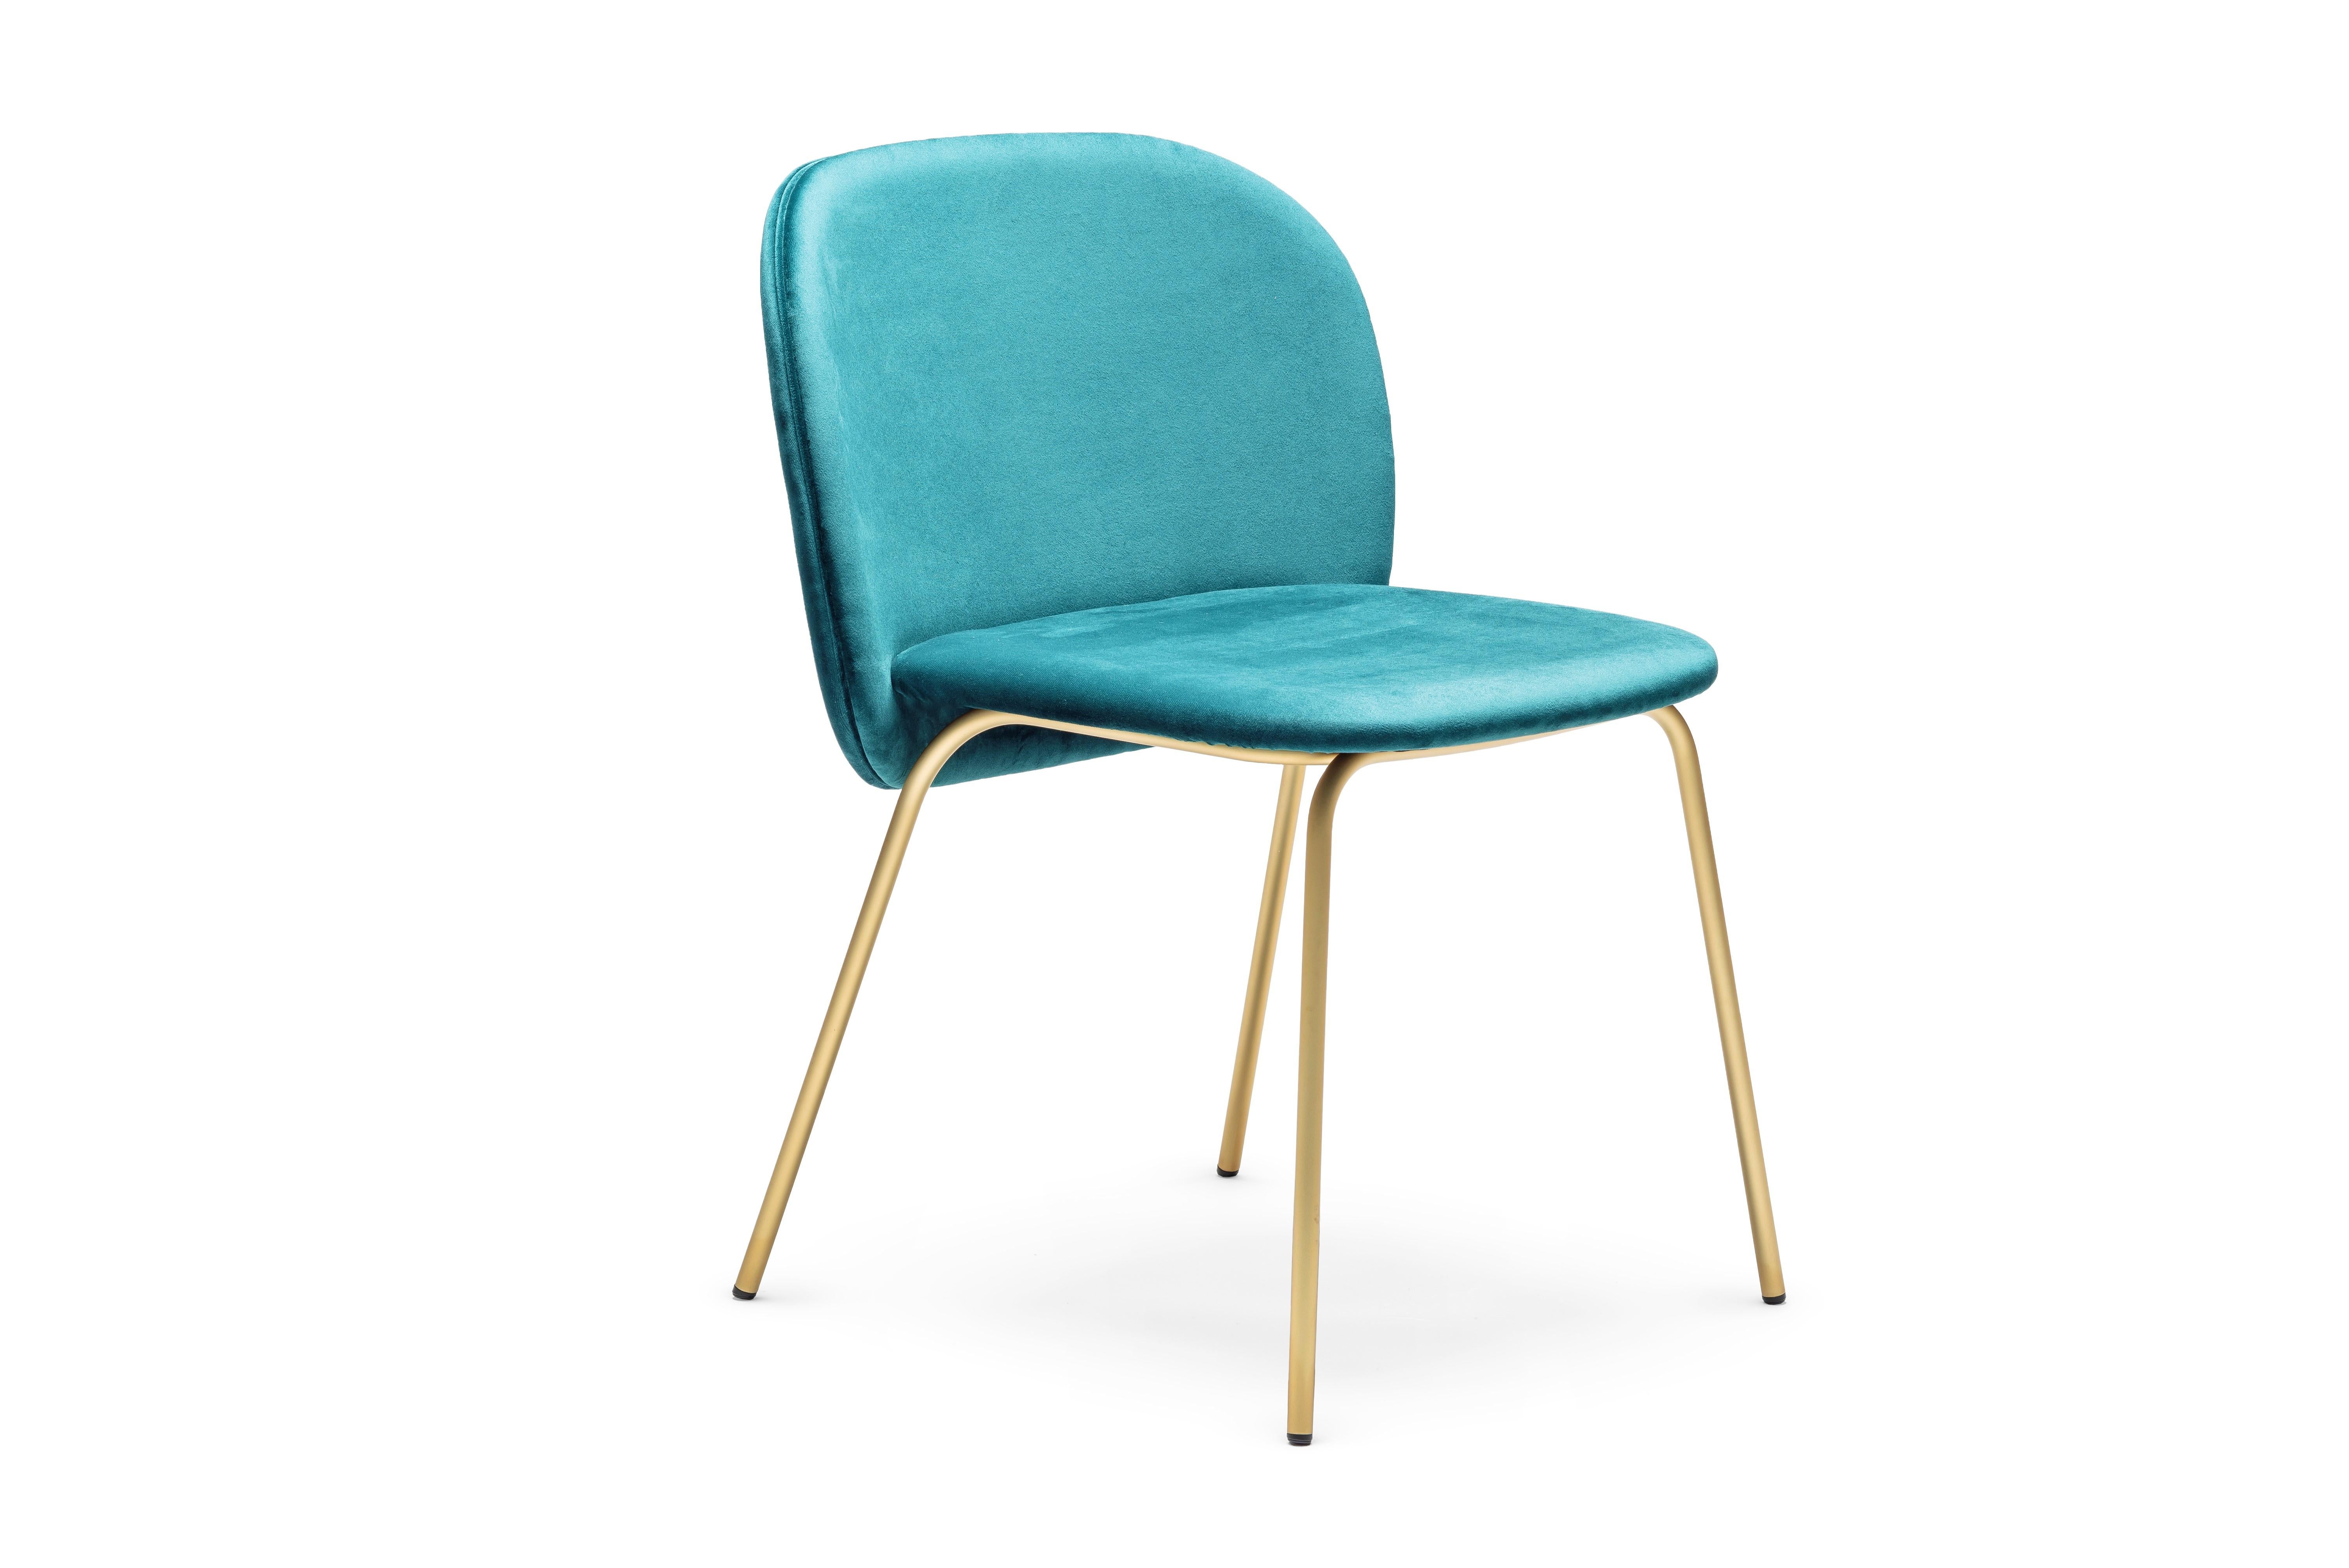 Sleek and stylish dining set of 8 chairs featuring ample curves and generous size with high functionality. Upholstered in arctic blue ultra suede fabric and satin brass base.
Handcrafted in Italy
Dimensions:
Width 58 cm - 23 in
Height 79 cm - 31